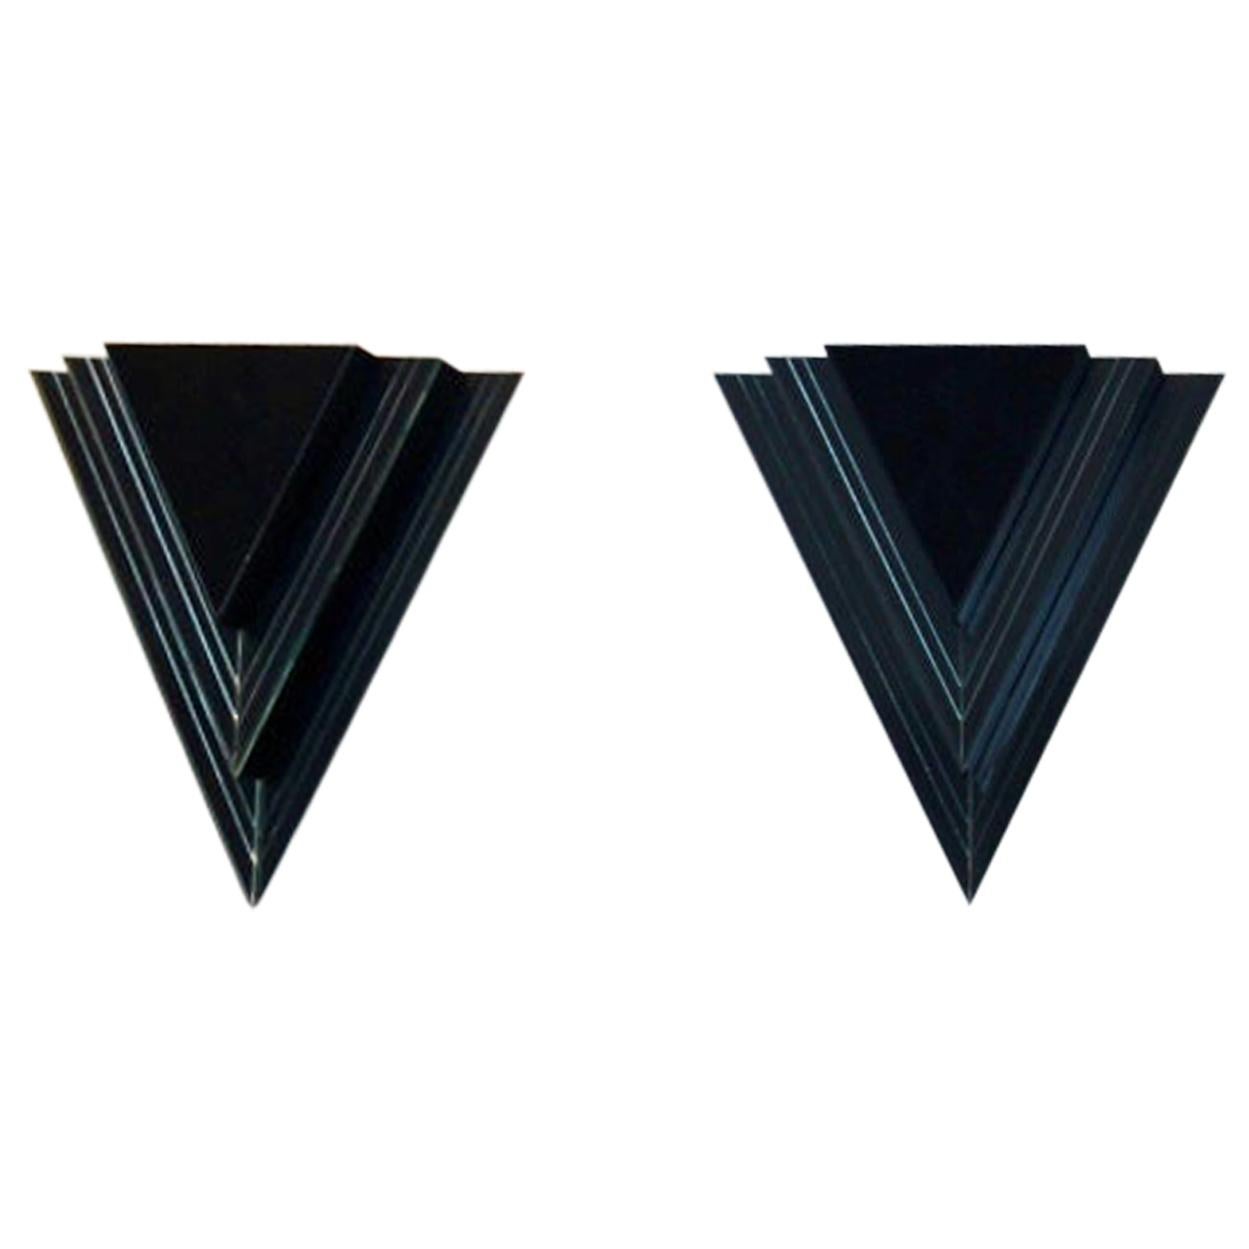 Dutch Modern Glass and Steel Triangular Wall Sconces For Sale